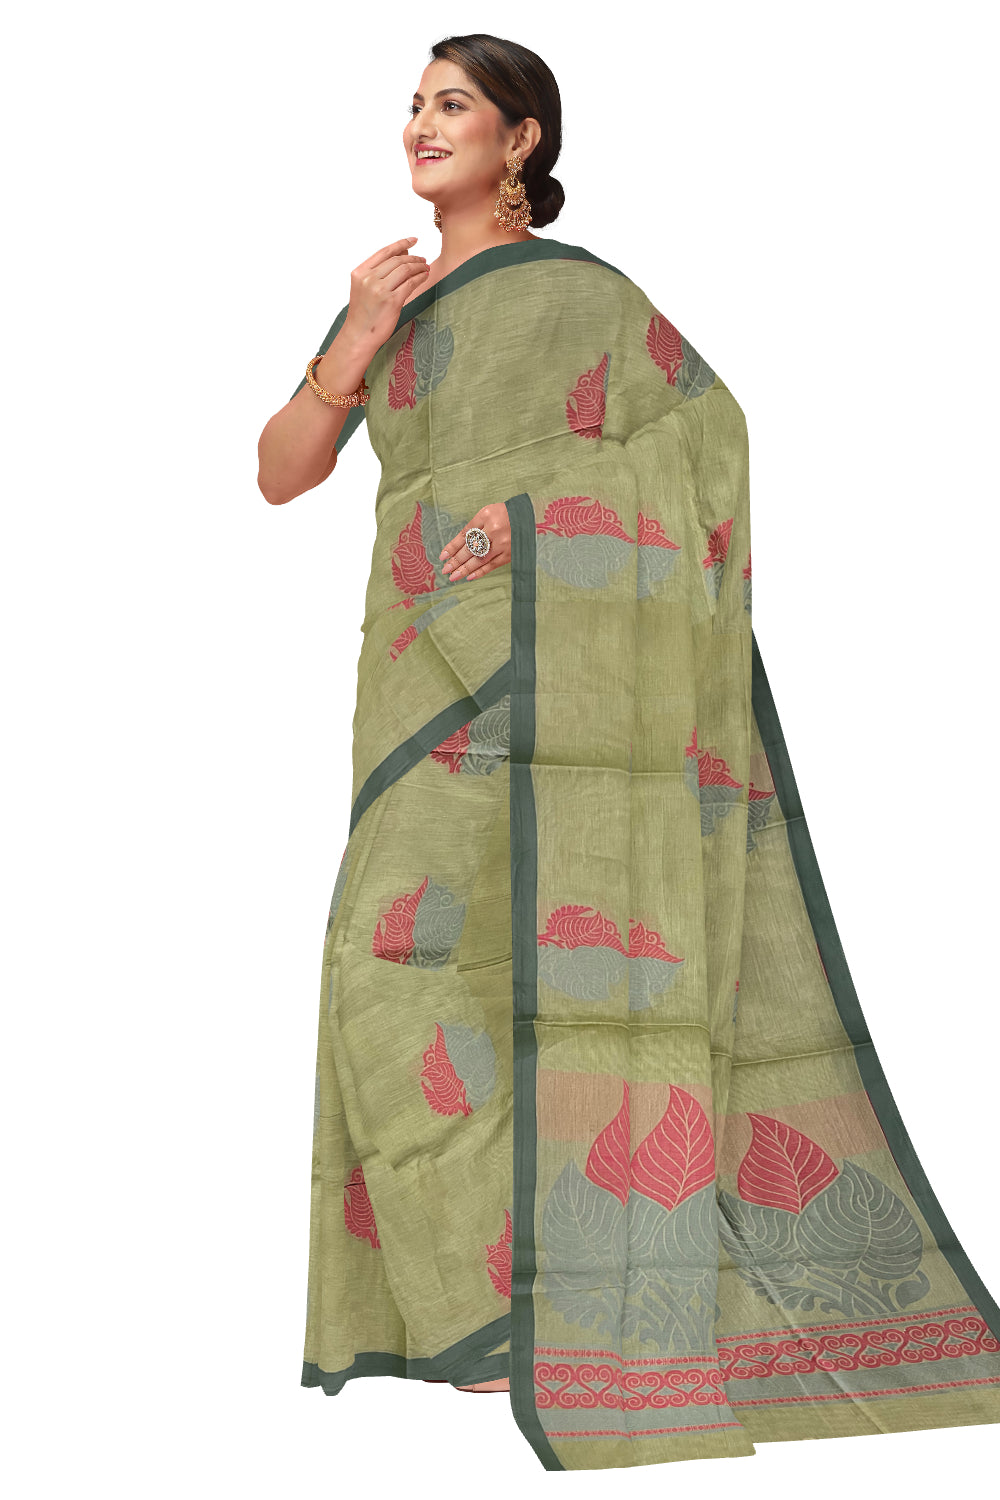 Southloom Green Cotton Saree with Woven Designs